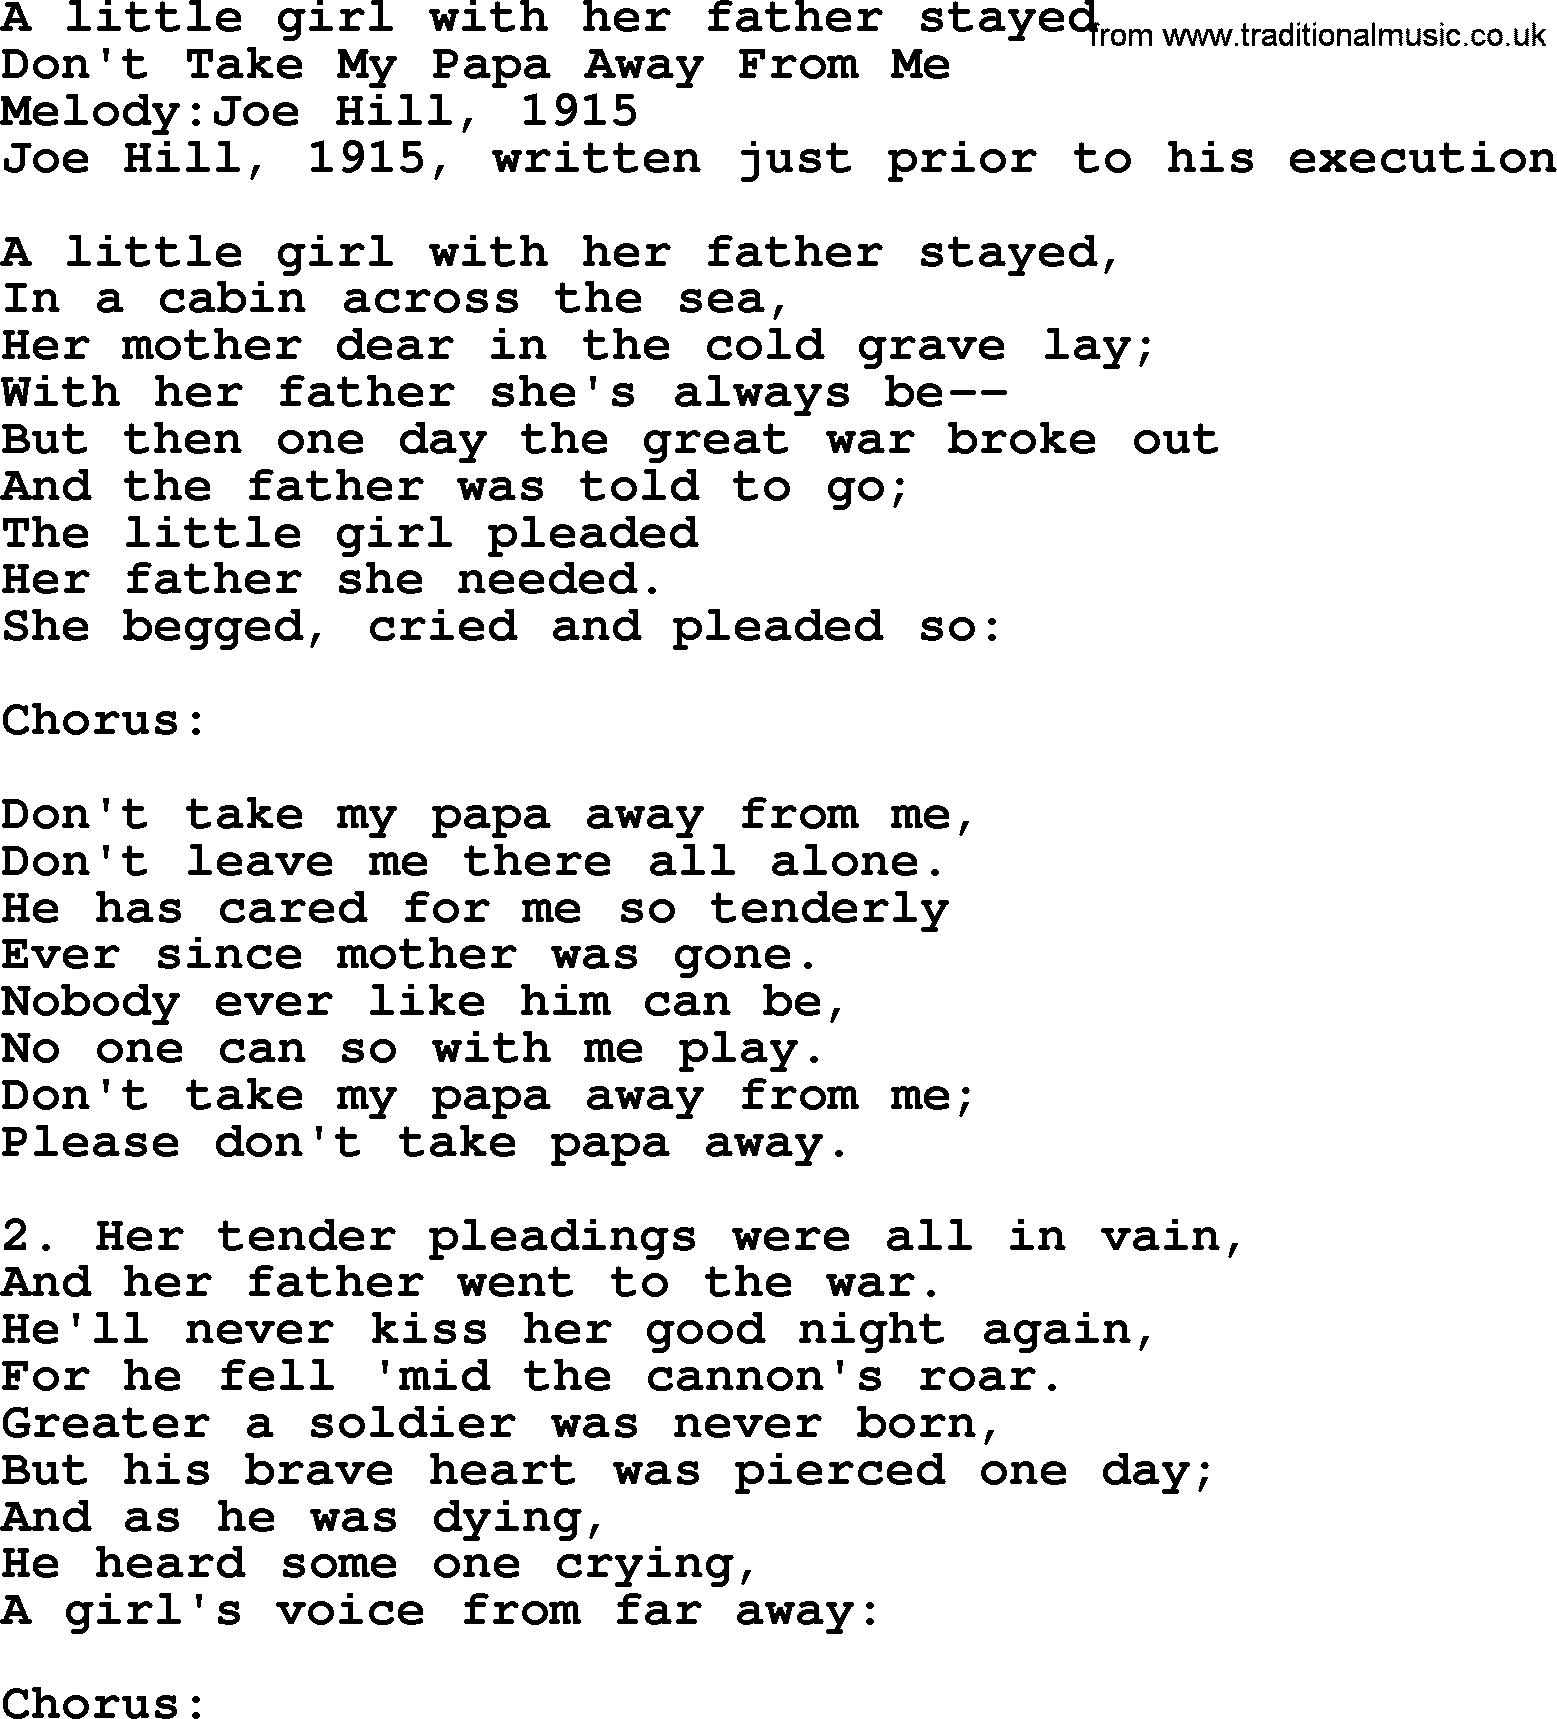 Political, Solidarity, Workers or Union song: A Little Girl With Her Father Stayed, lyrics